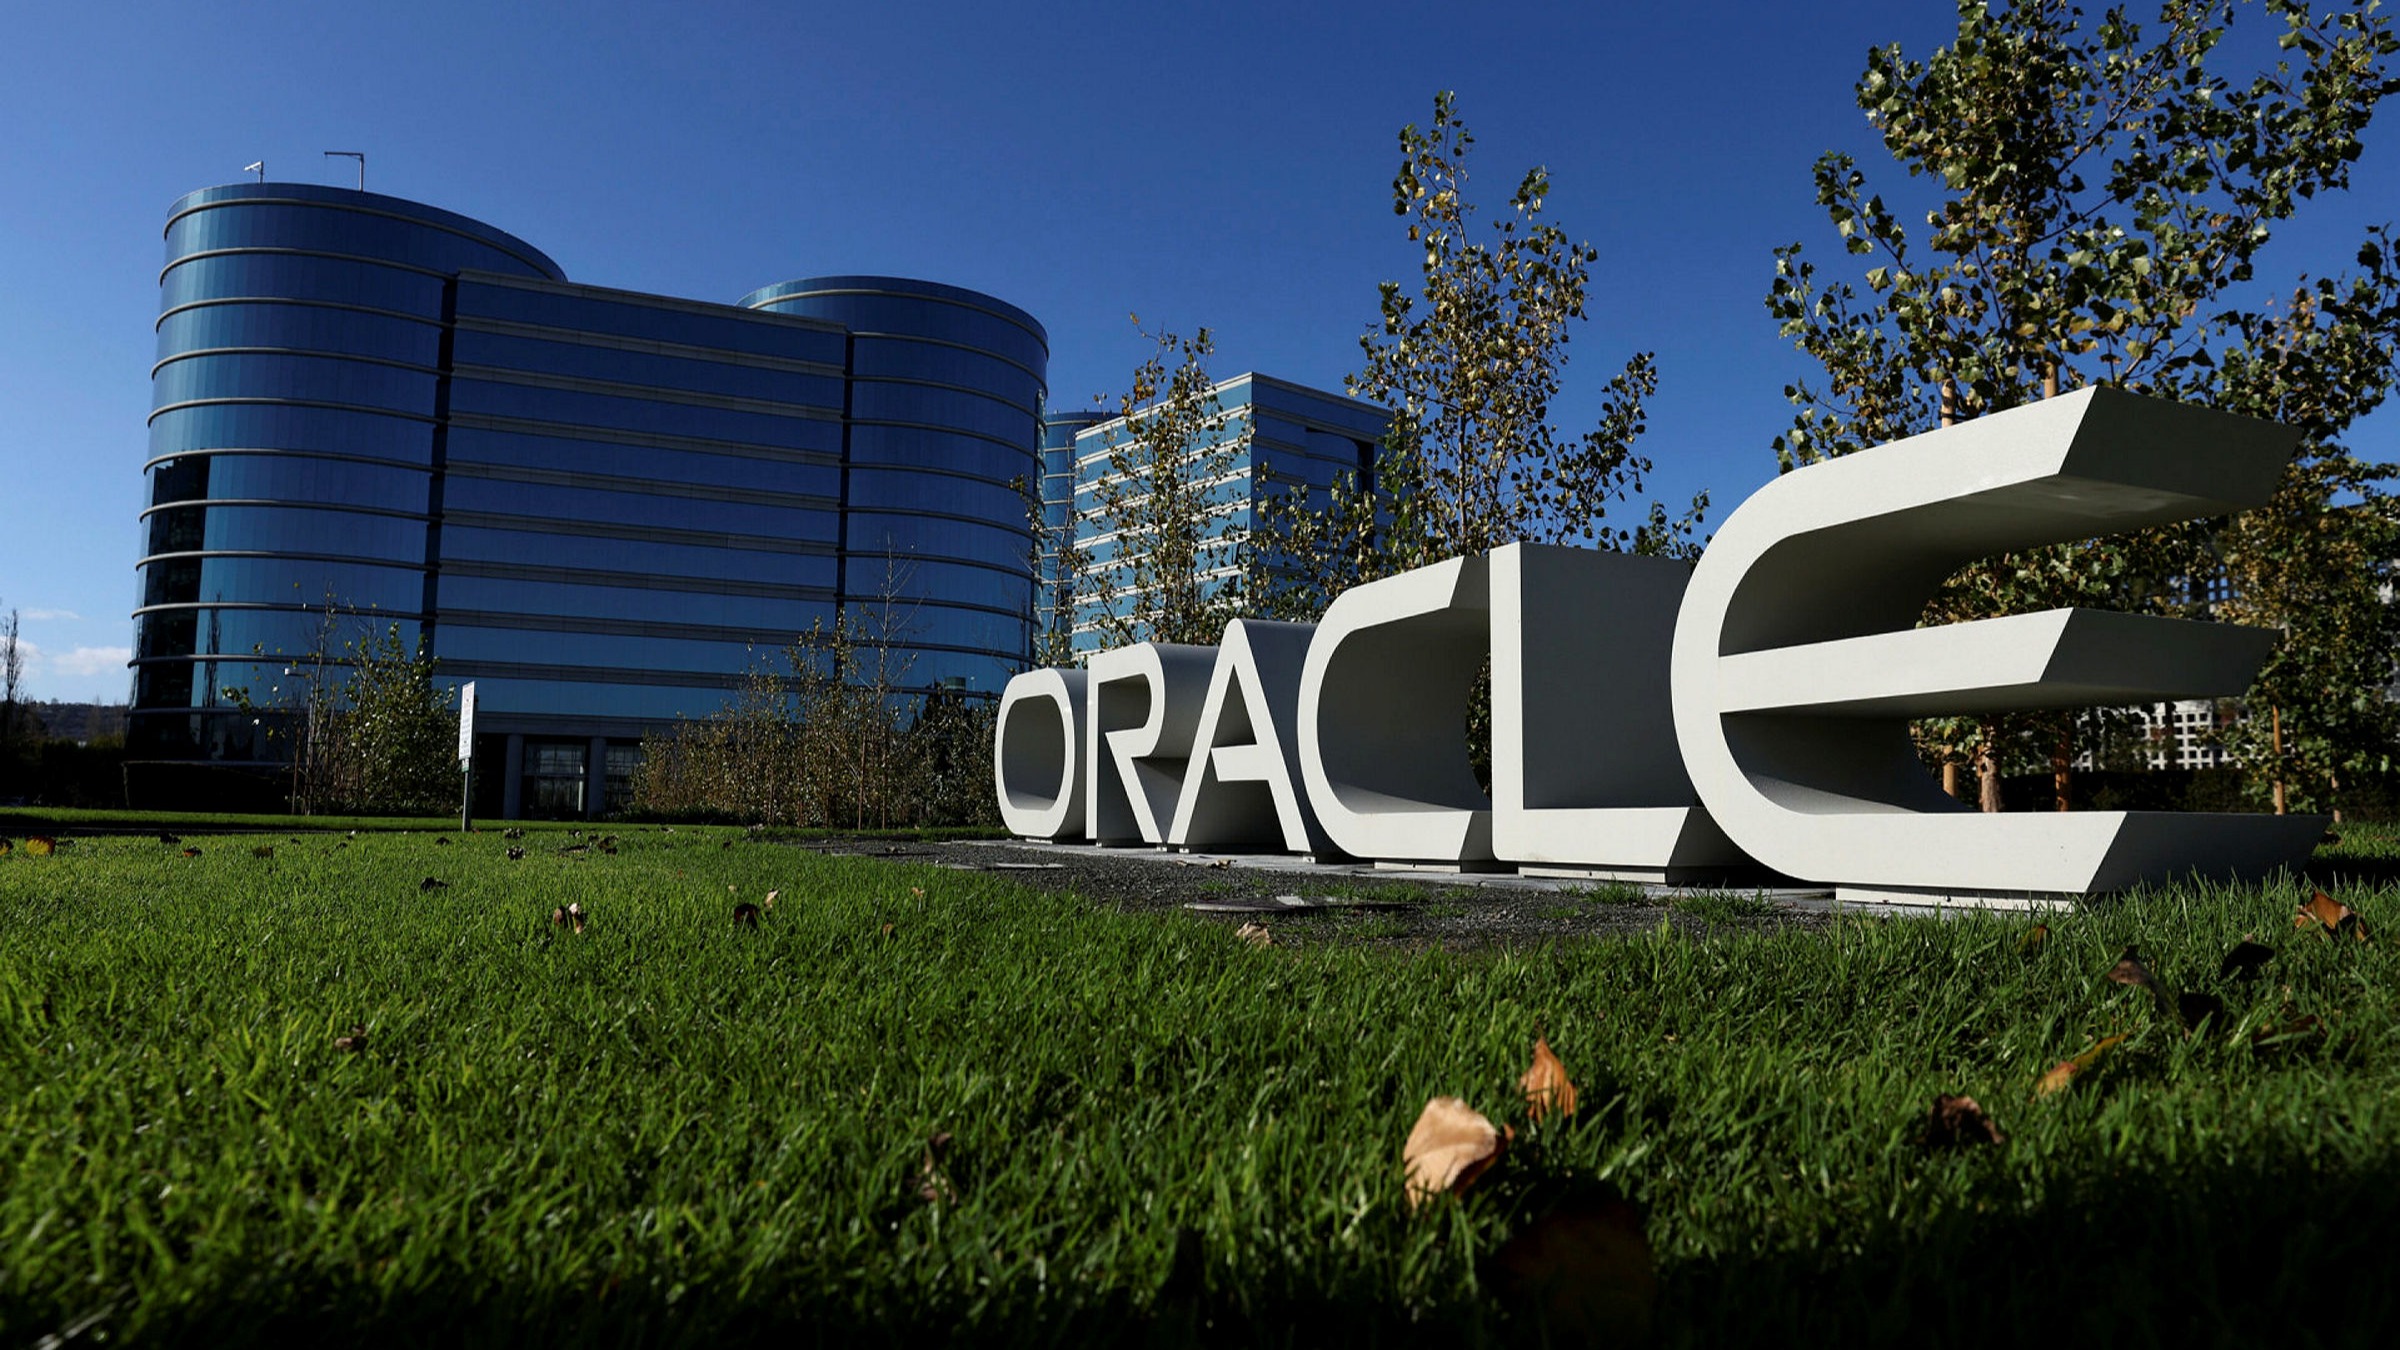 Cloud major Oracle lays off over 3,000 employees from health IT arm Cerner.